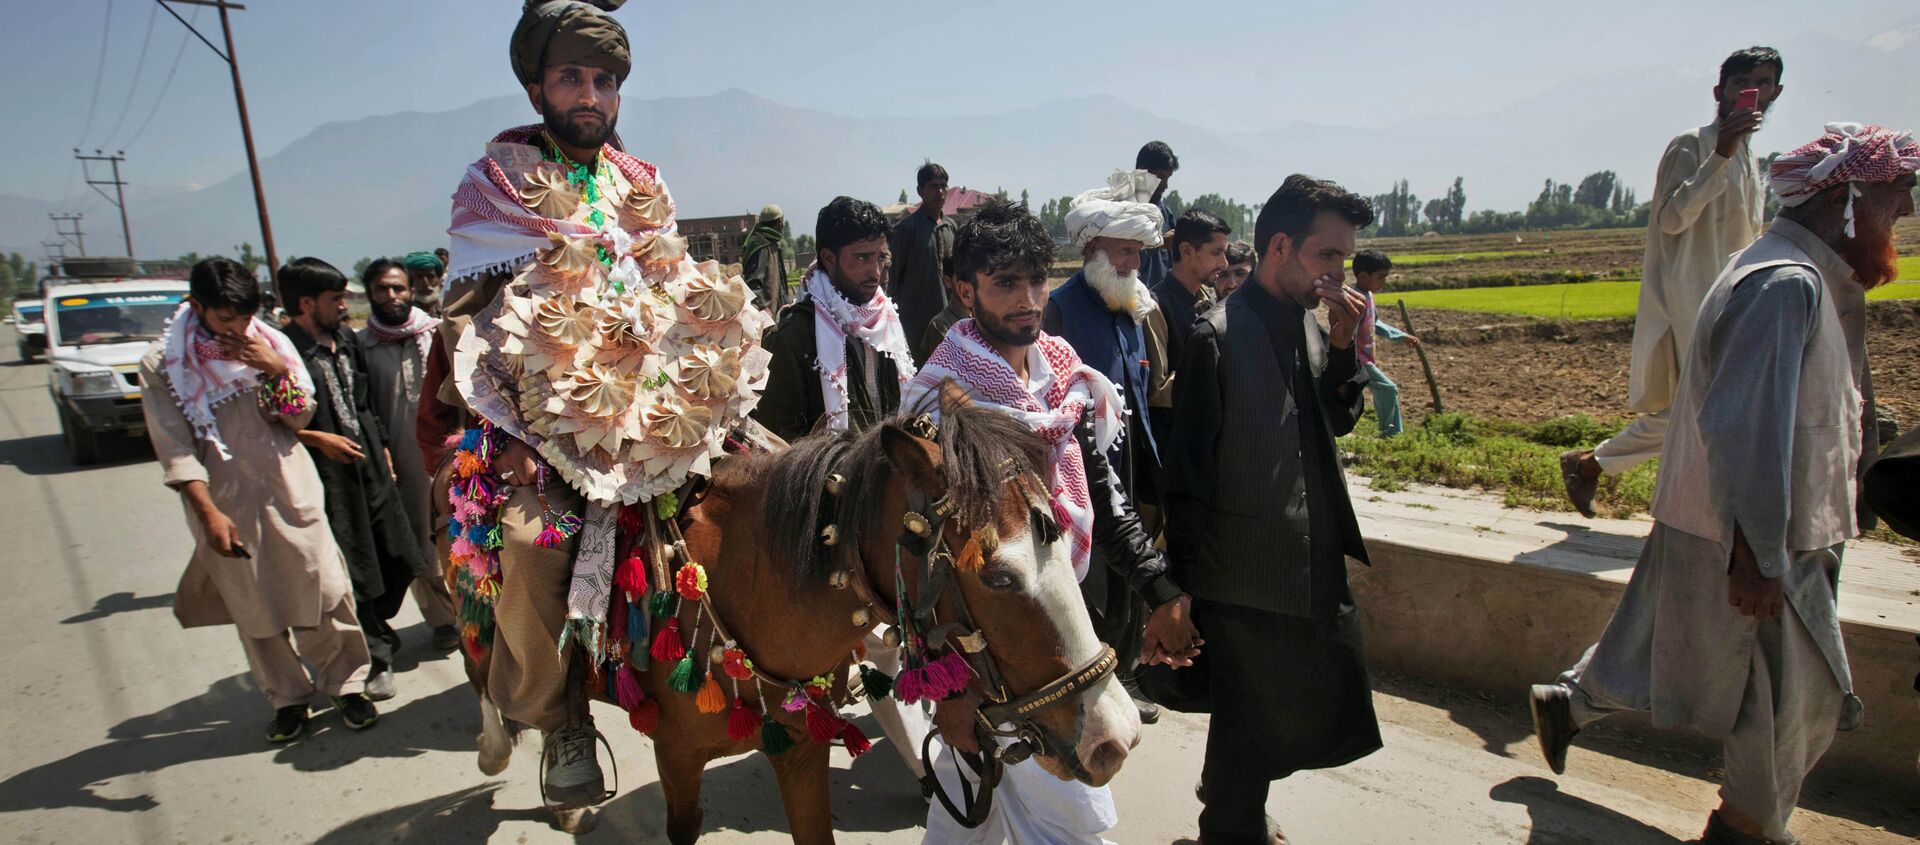 Mohammad Farooq, a Kashmiri Bakarwal nomad arrives for his wedding ceremony  on a horse on the outskirts of Srinagar, India, Friday, May 31, 2013 - Sputnik International, 1920, 03.06.2021